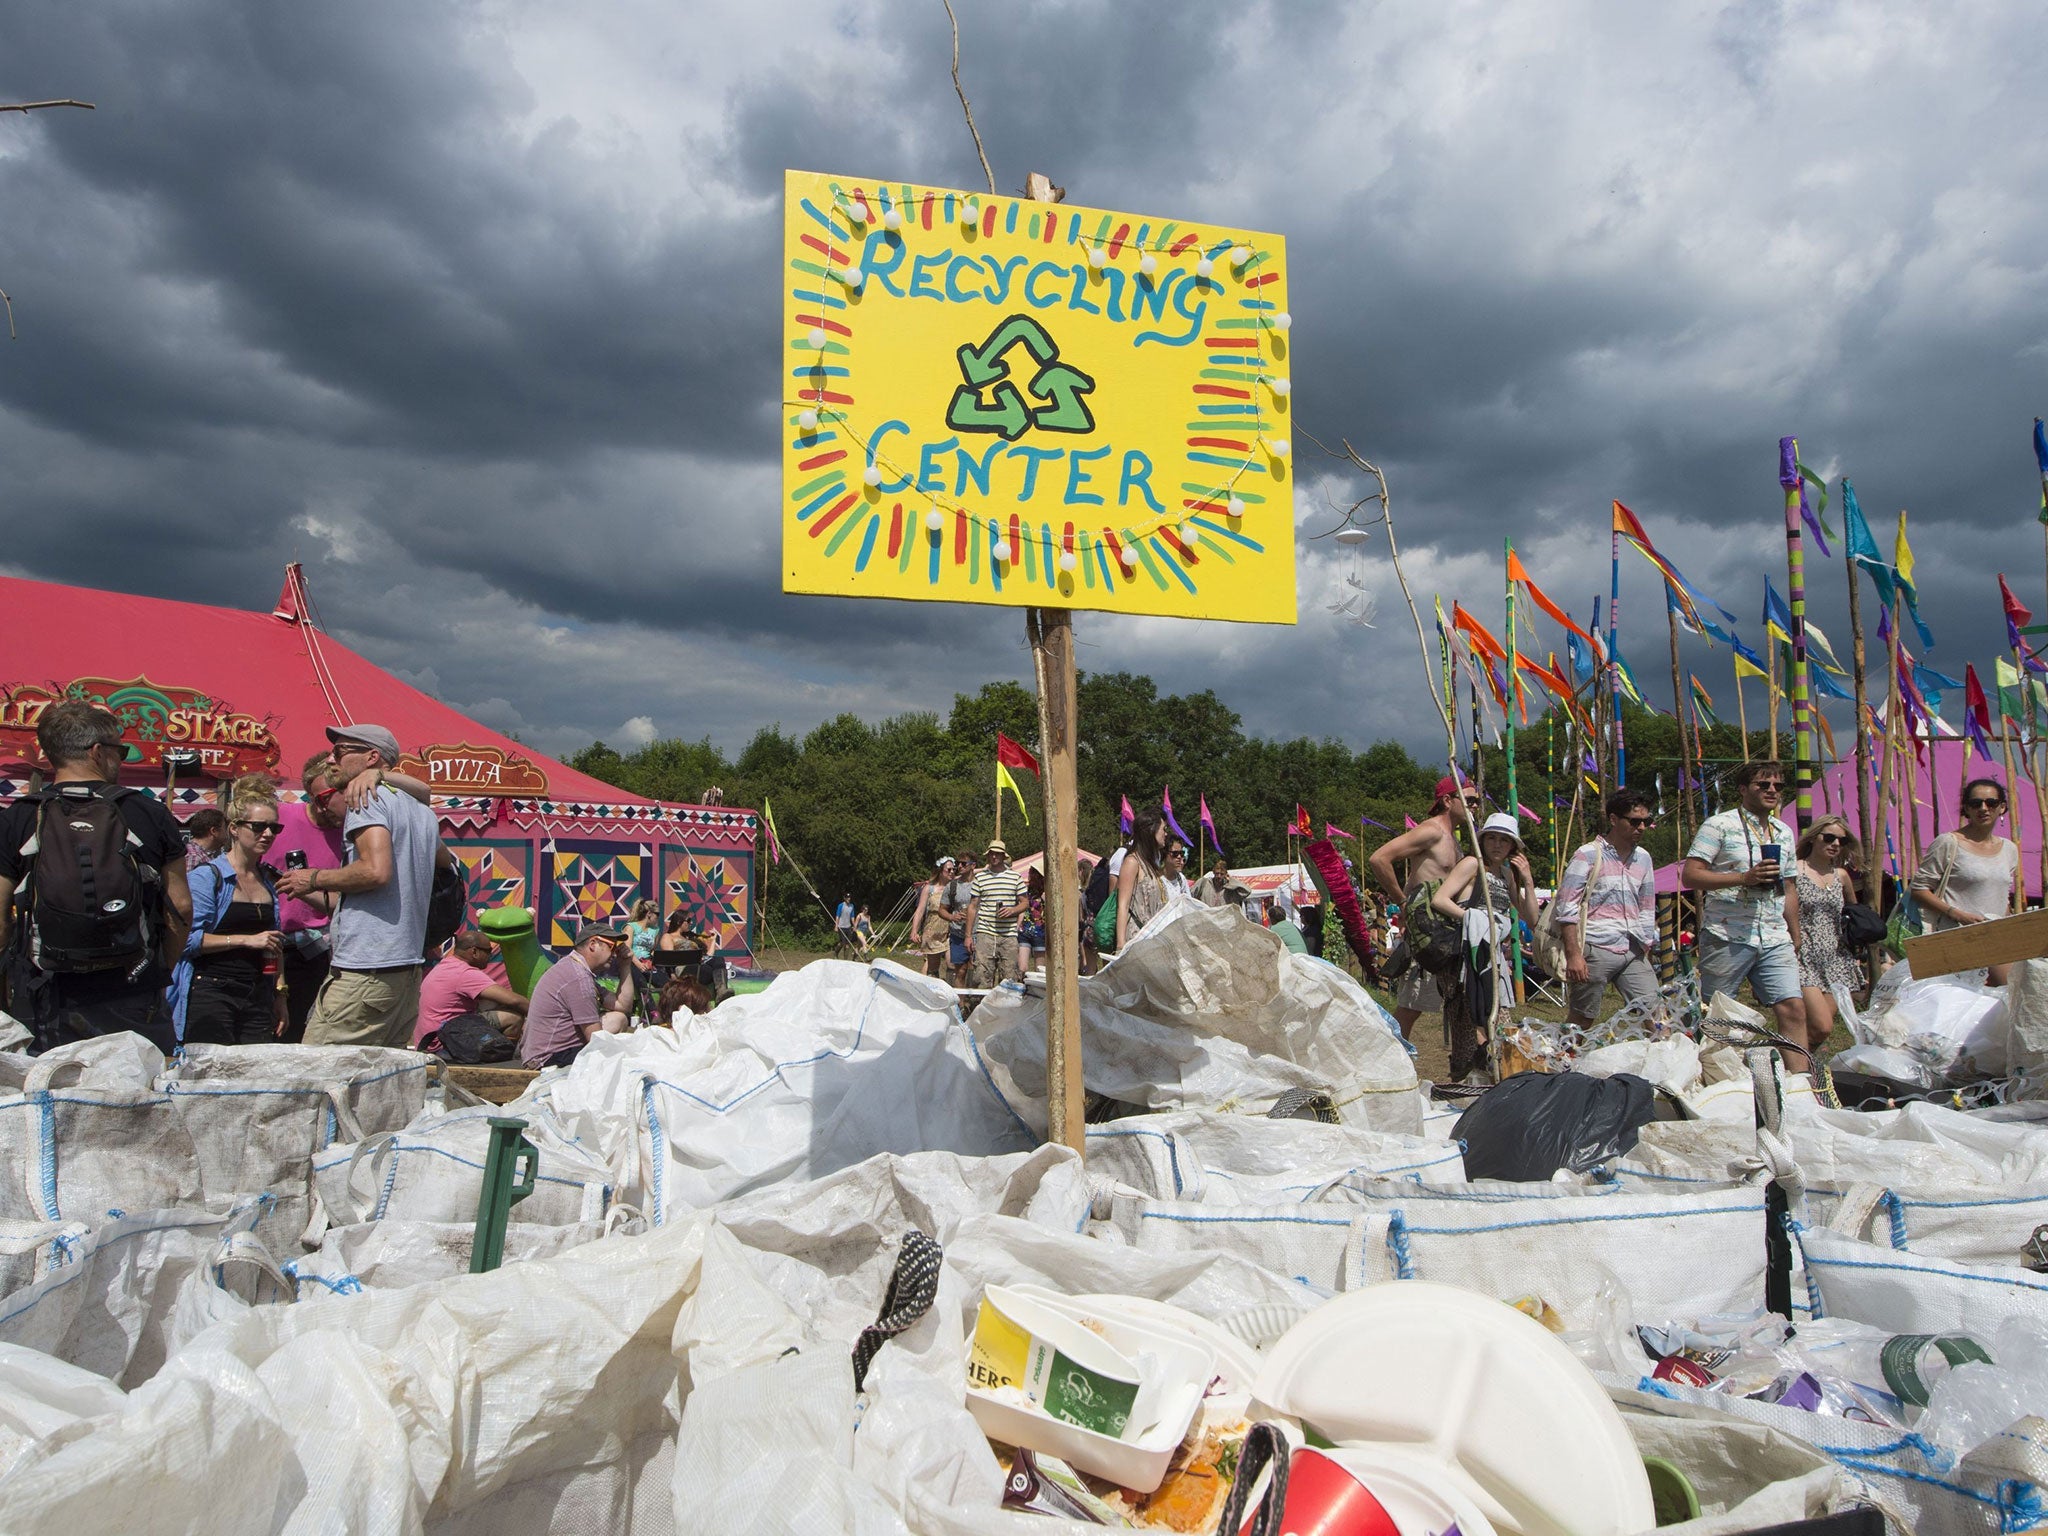 Recycling bins at the Glastonbury Festival, at Worthy Farm in Somerset